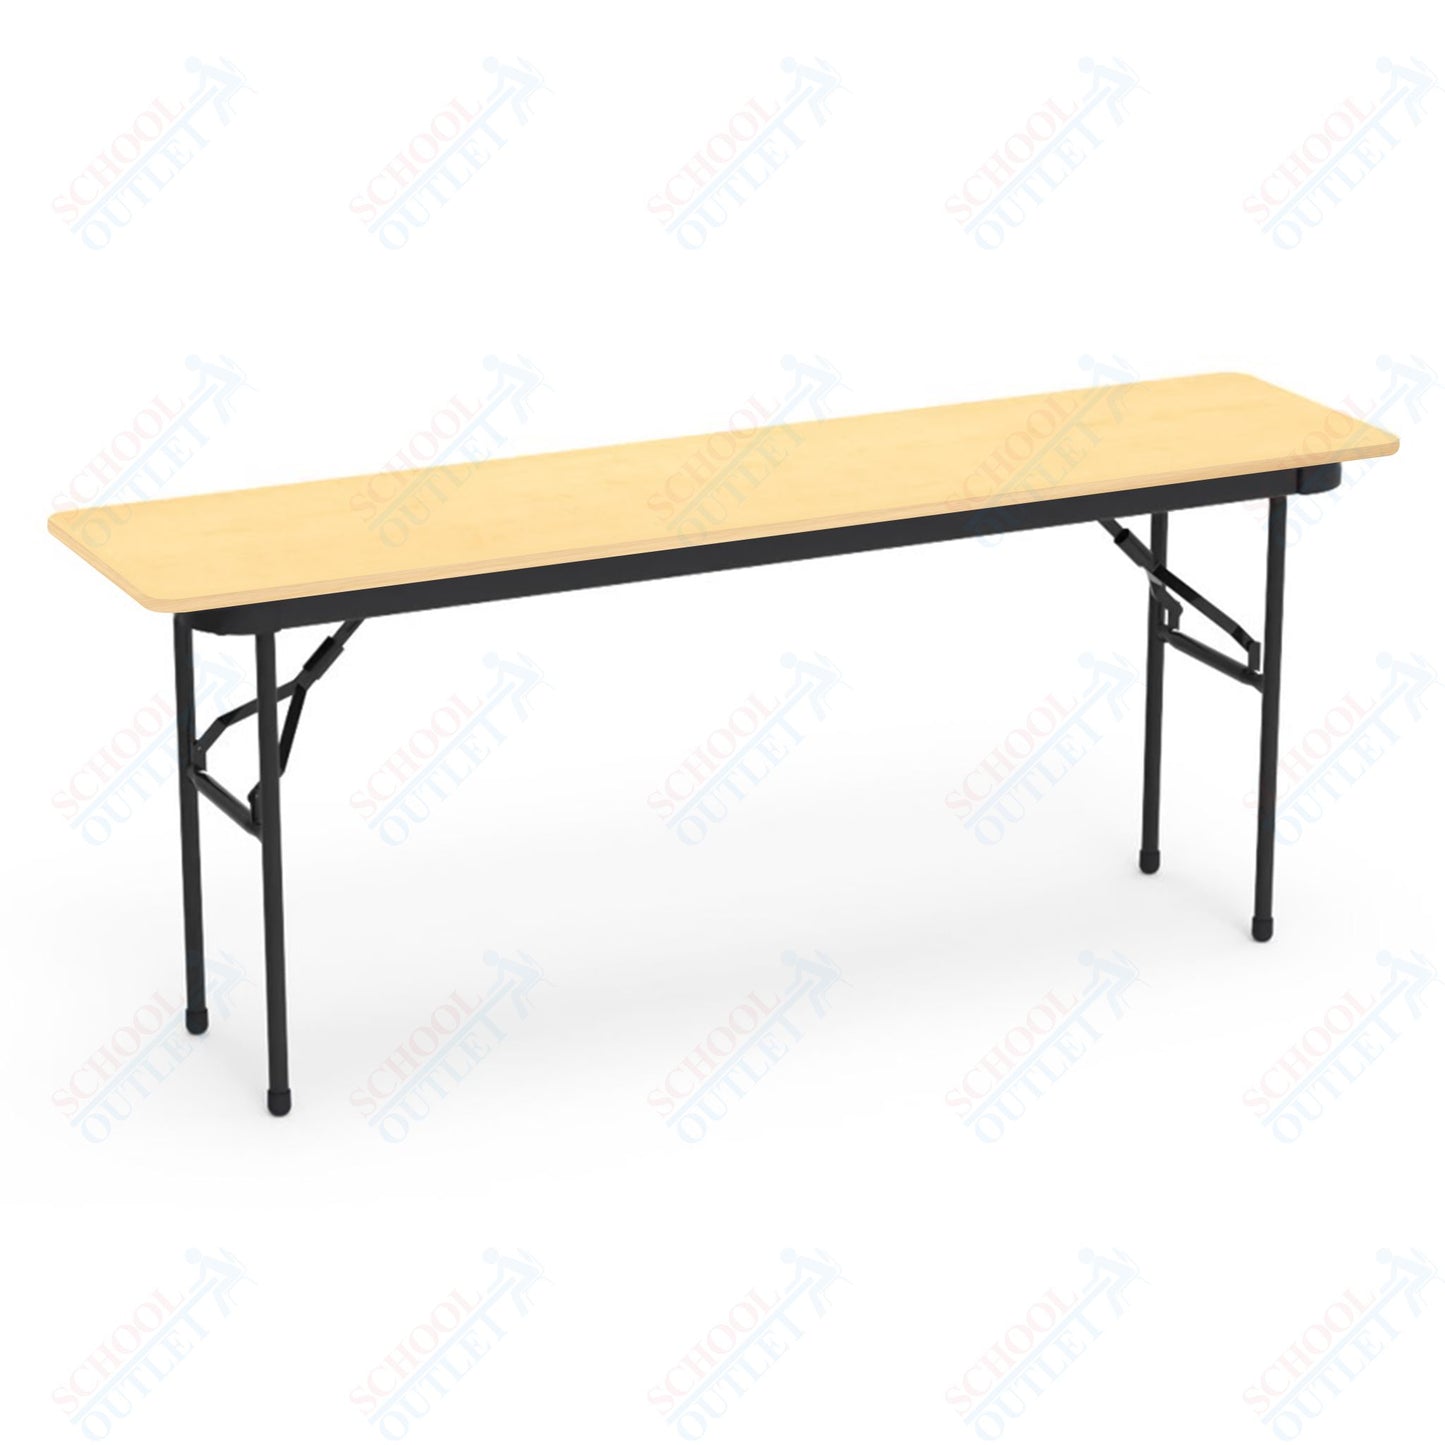 Virco 601872 Sale  - 6000 series 3/4" thick particle board folding table 18" x 72"